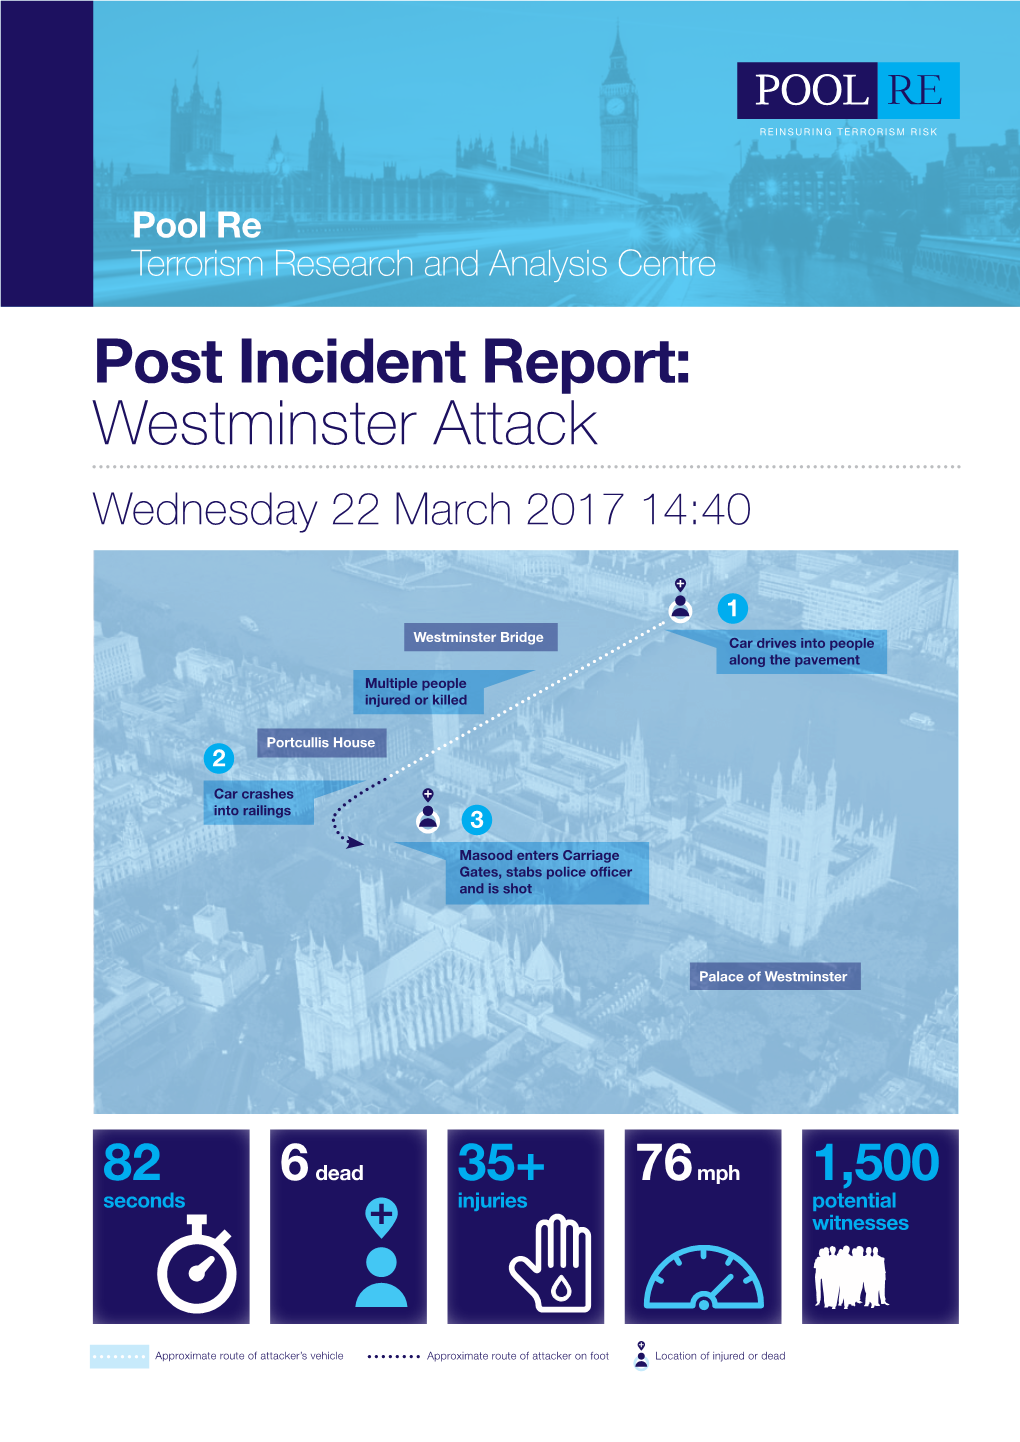 Post Incident Report: Westminster Attack Wednesday 22 March 2017 14:40